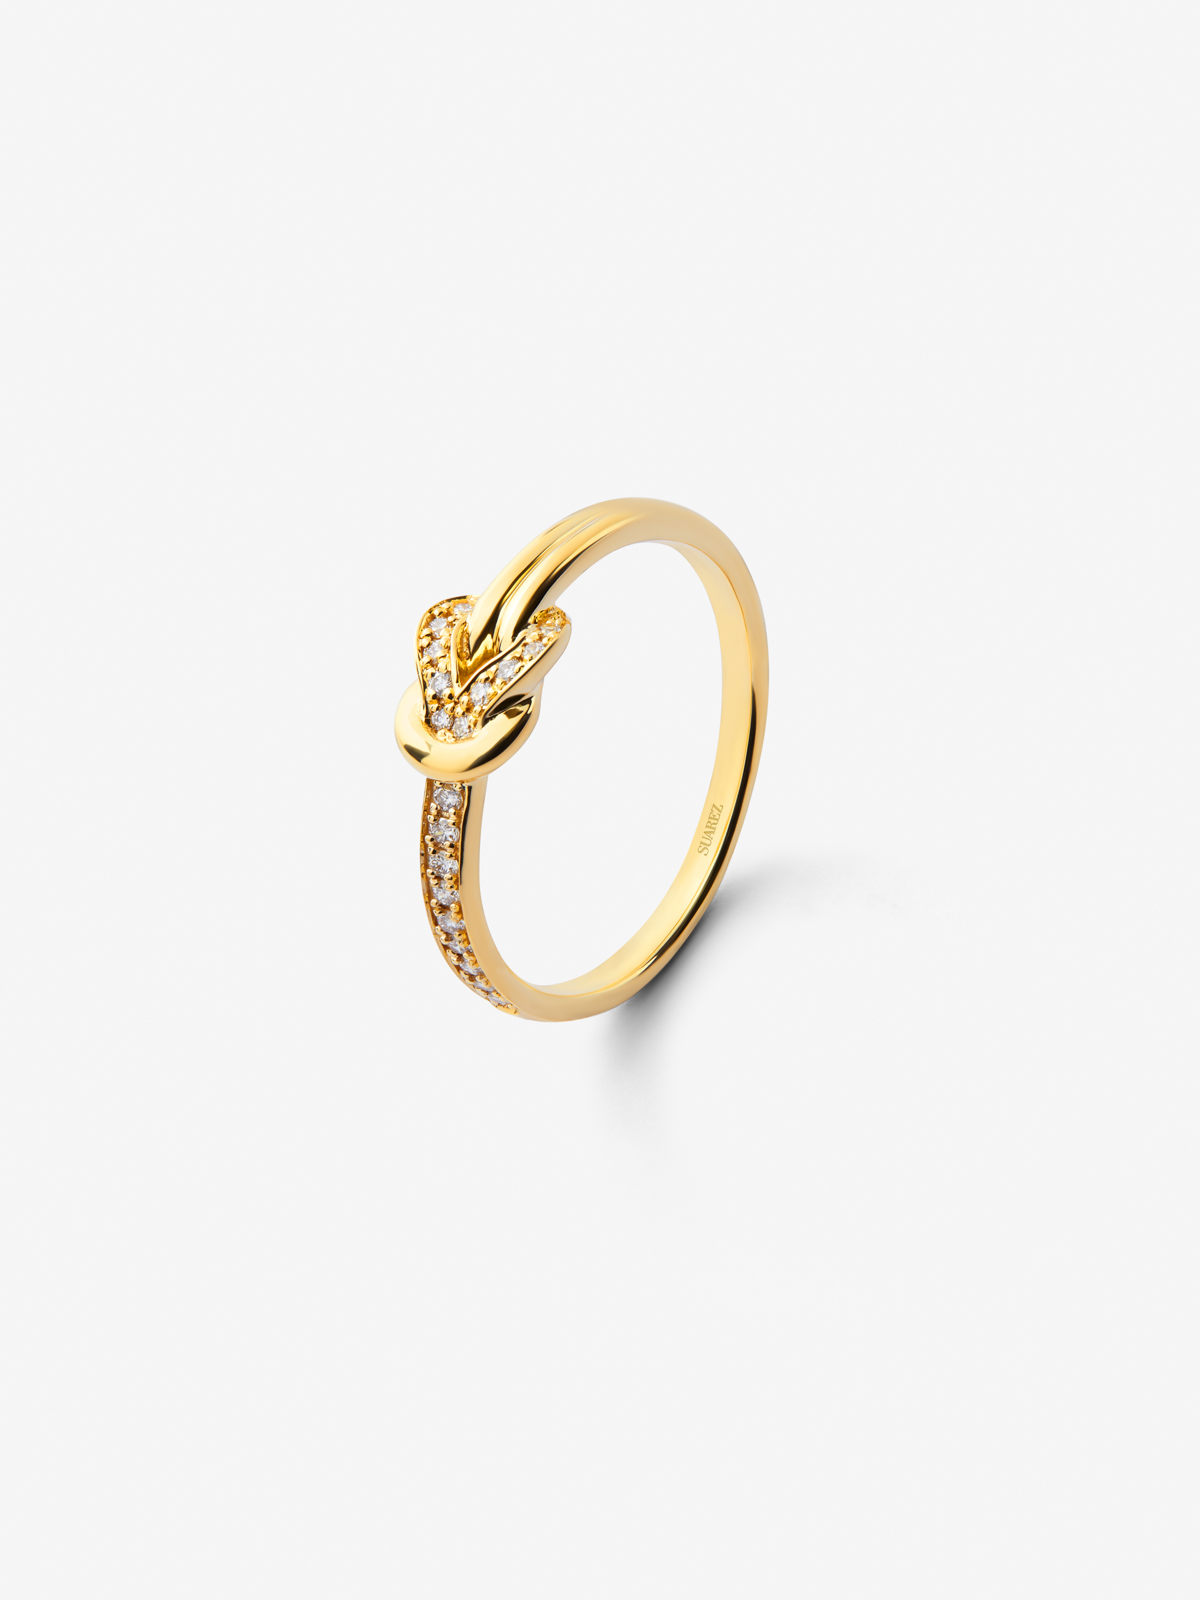 18K yellow gold ring with white diamonds of 0.05 cts and knot shape